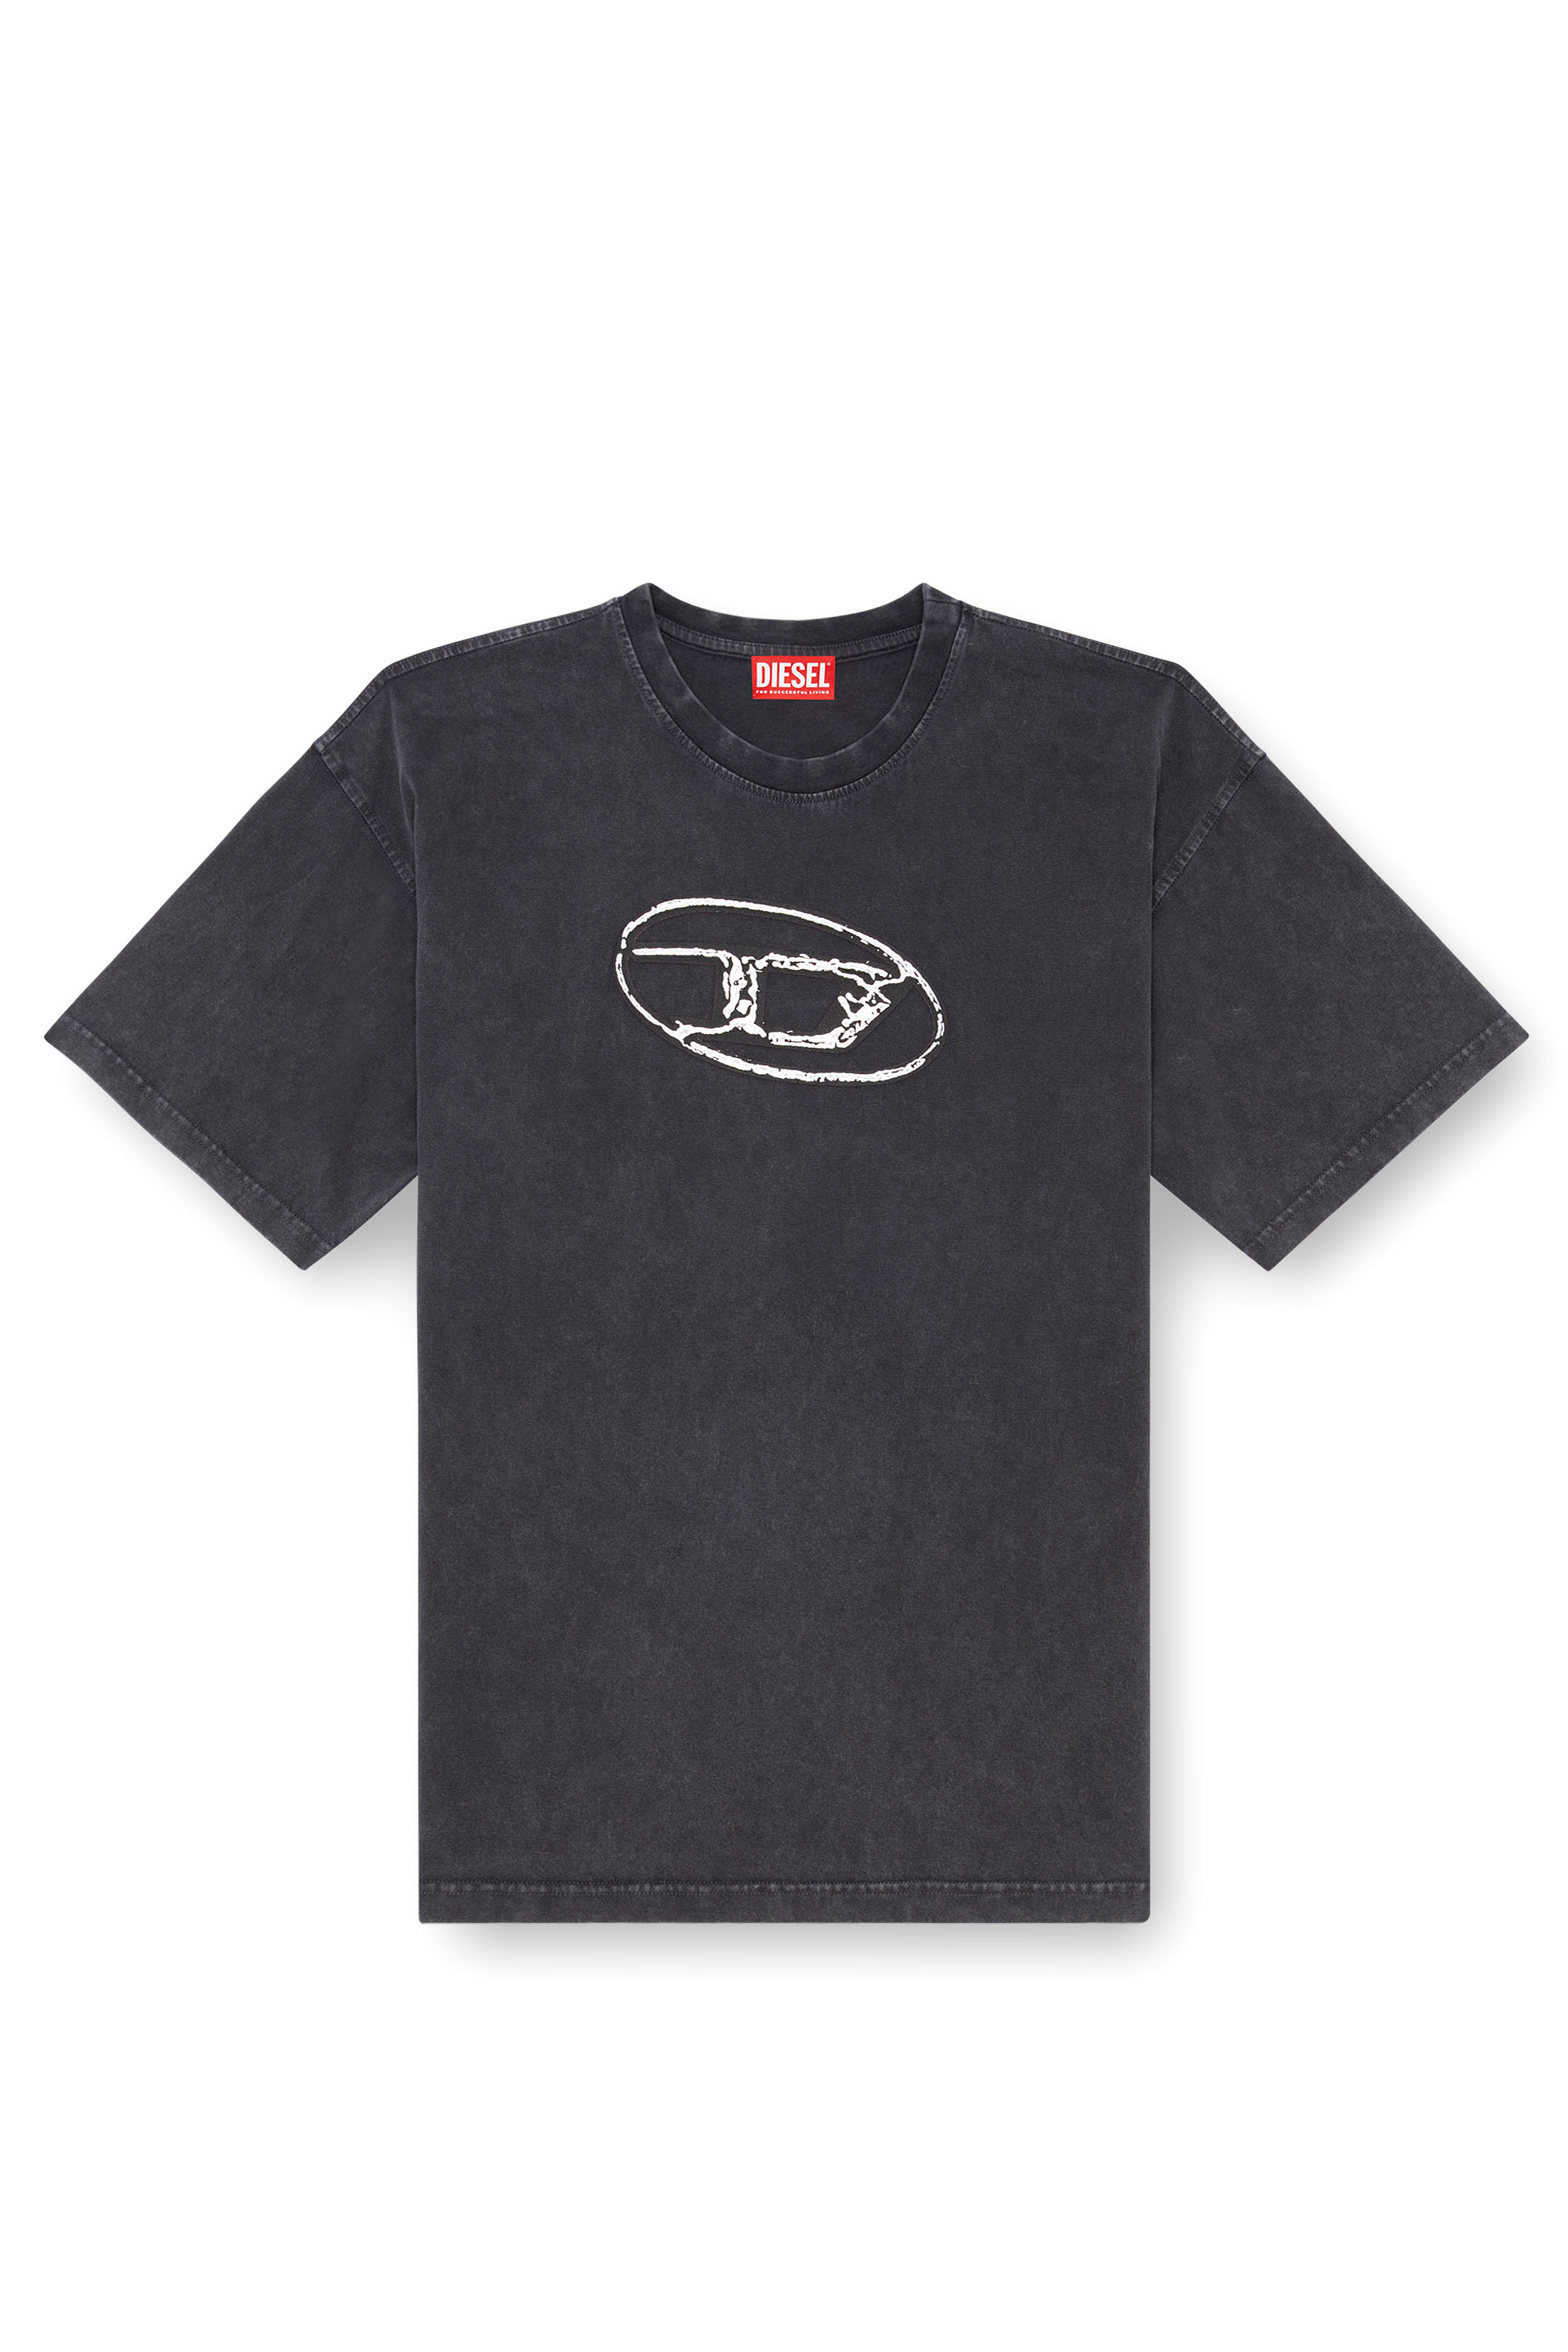 Diesel - T-BOXT-Q22, Man Faded T-shirt with Oval D print in Black - Image 1